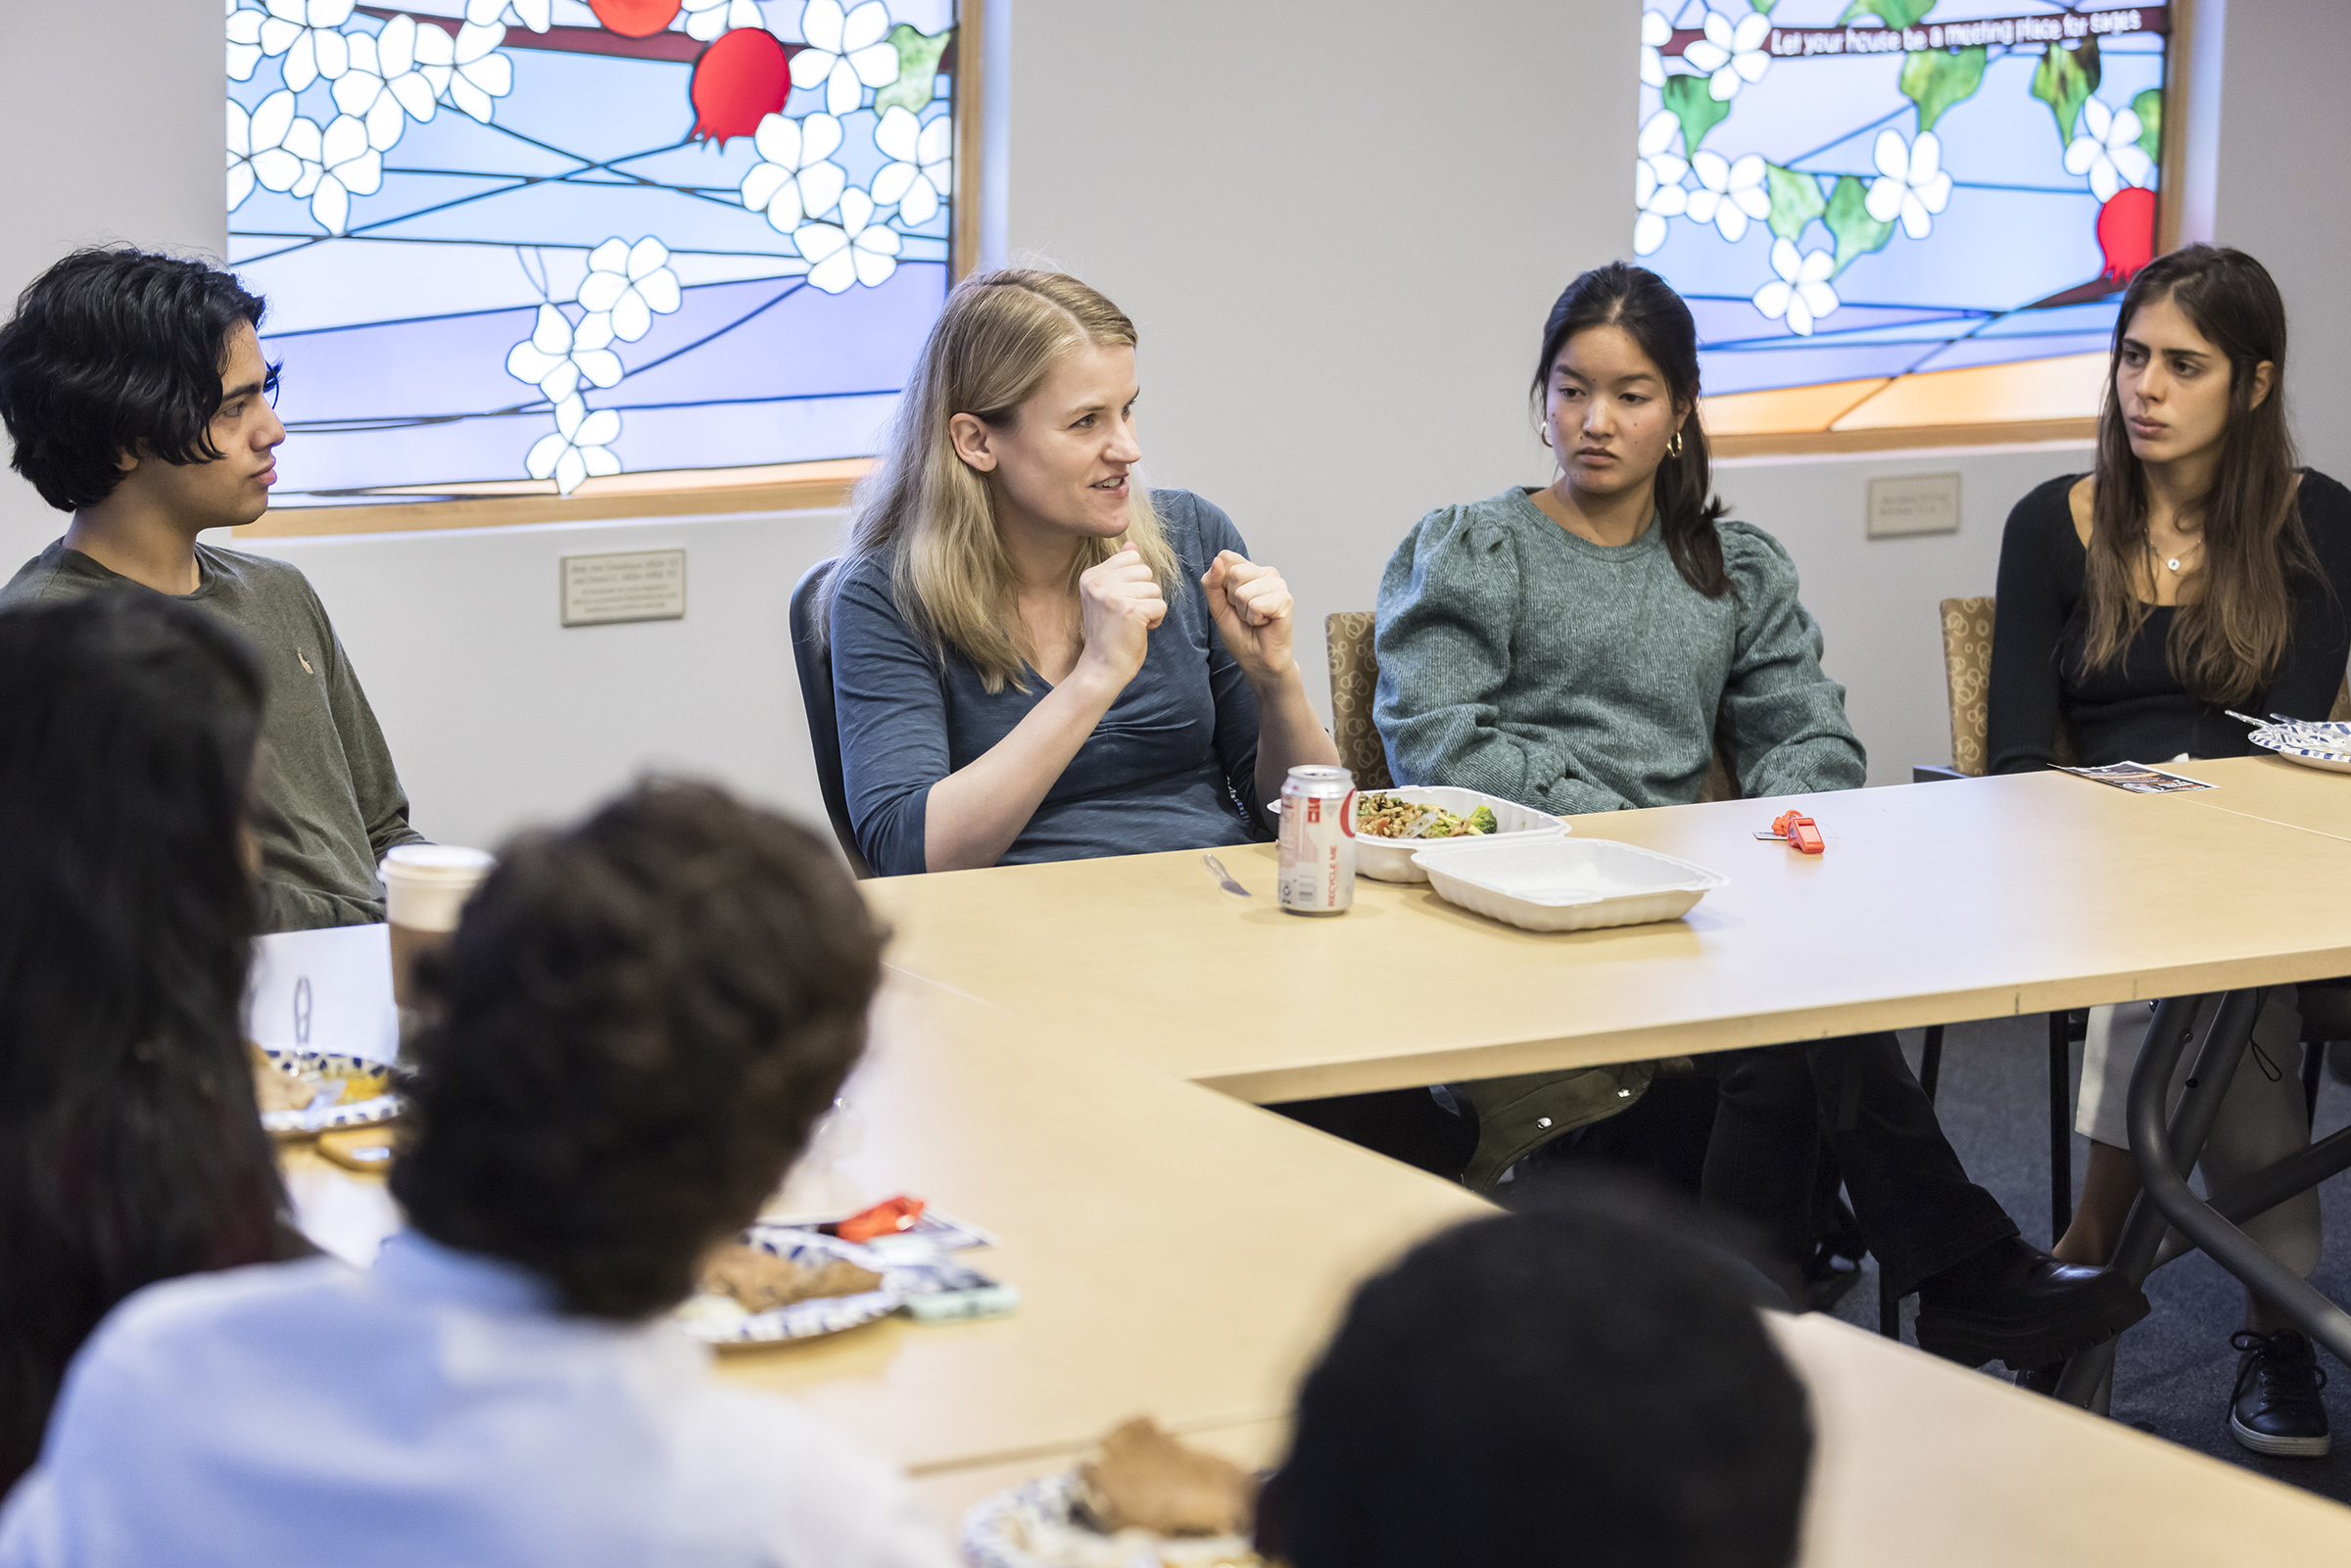 Frances Haugen, a data scientist who came forward as a whistleblower against her employer Facebook disclosing tens of thousands of the company's documents in 2021, spoke to students at Stanford University, March 3, 2022. (Carlos Avila Gonzalez—The San Francisco Chronicle/Getty Images)